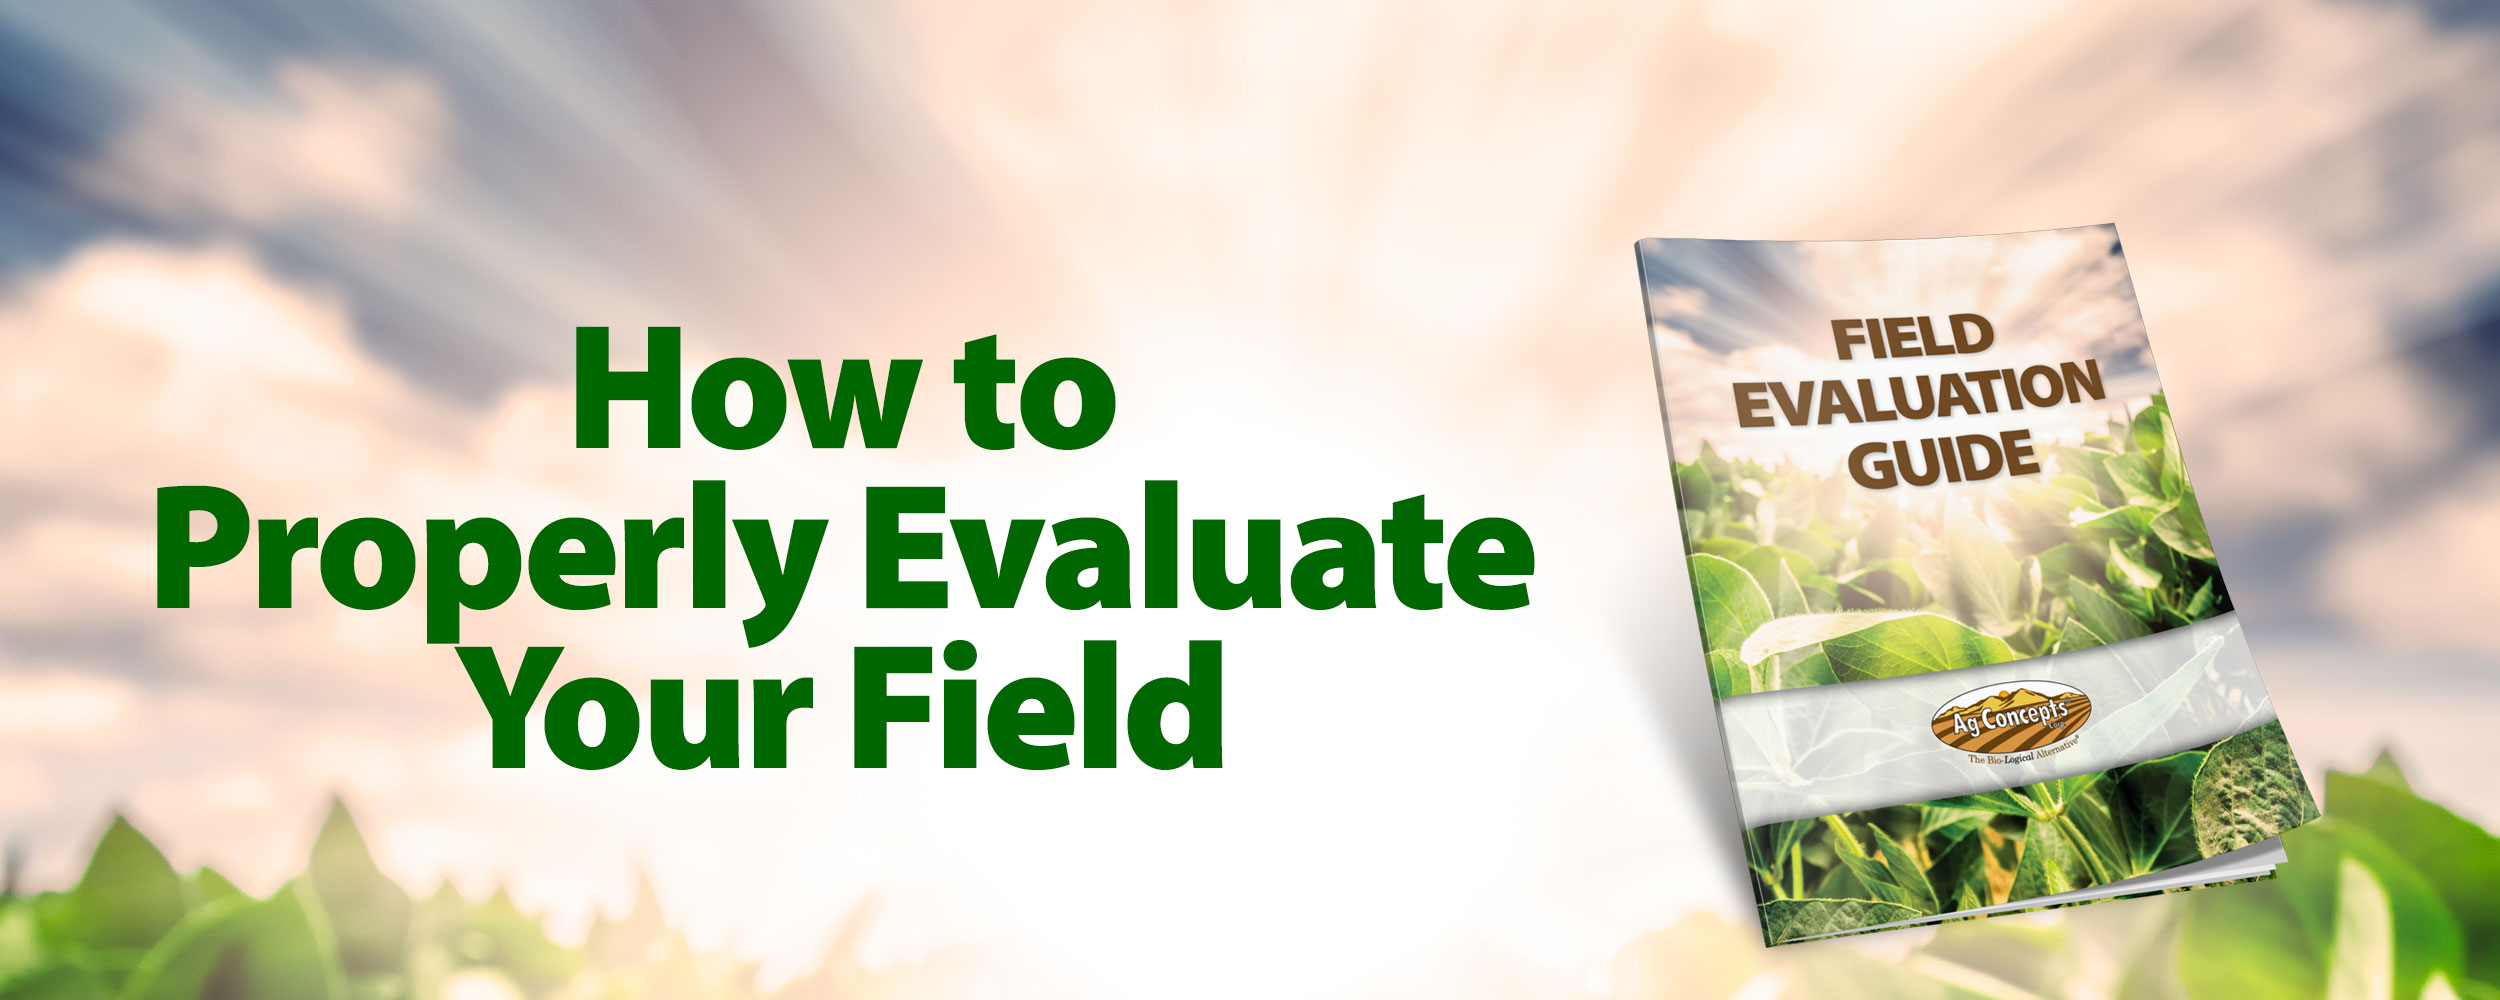 How to Evaluate Your Field Banner